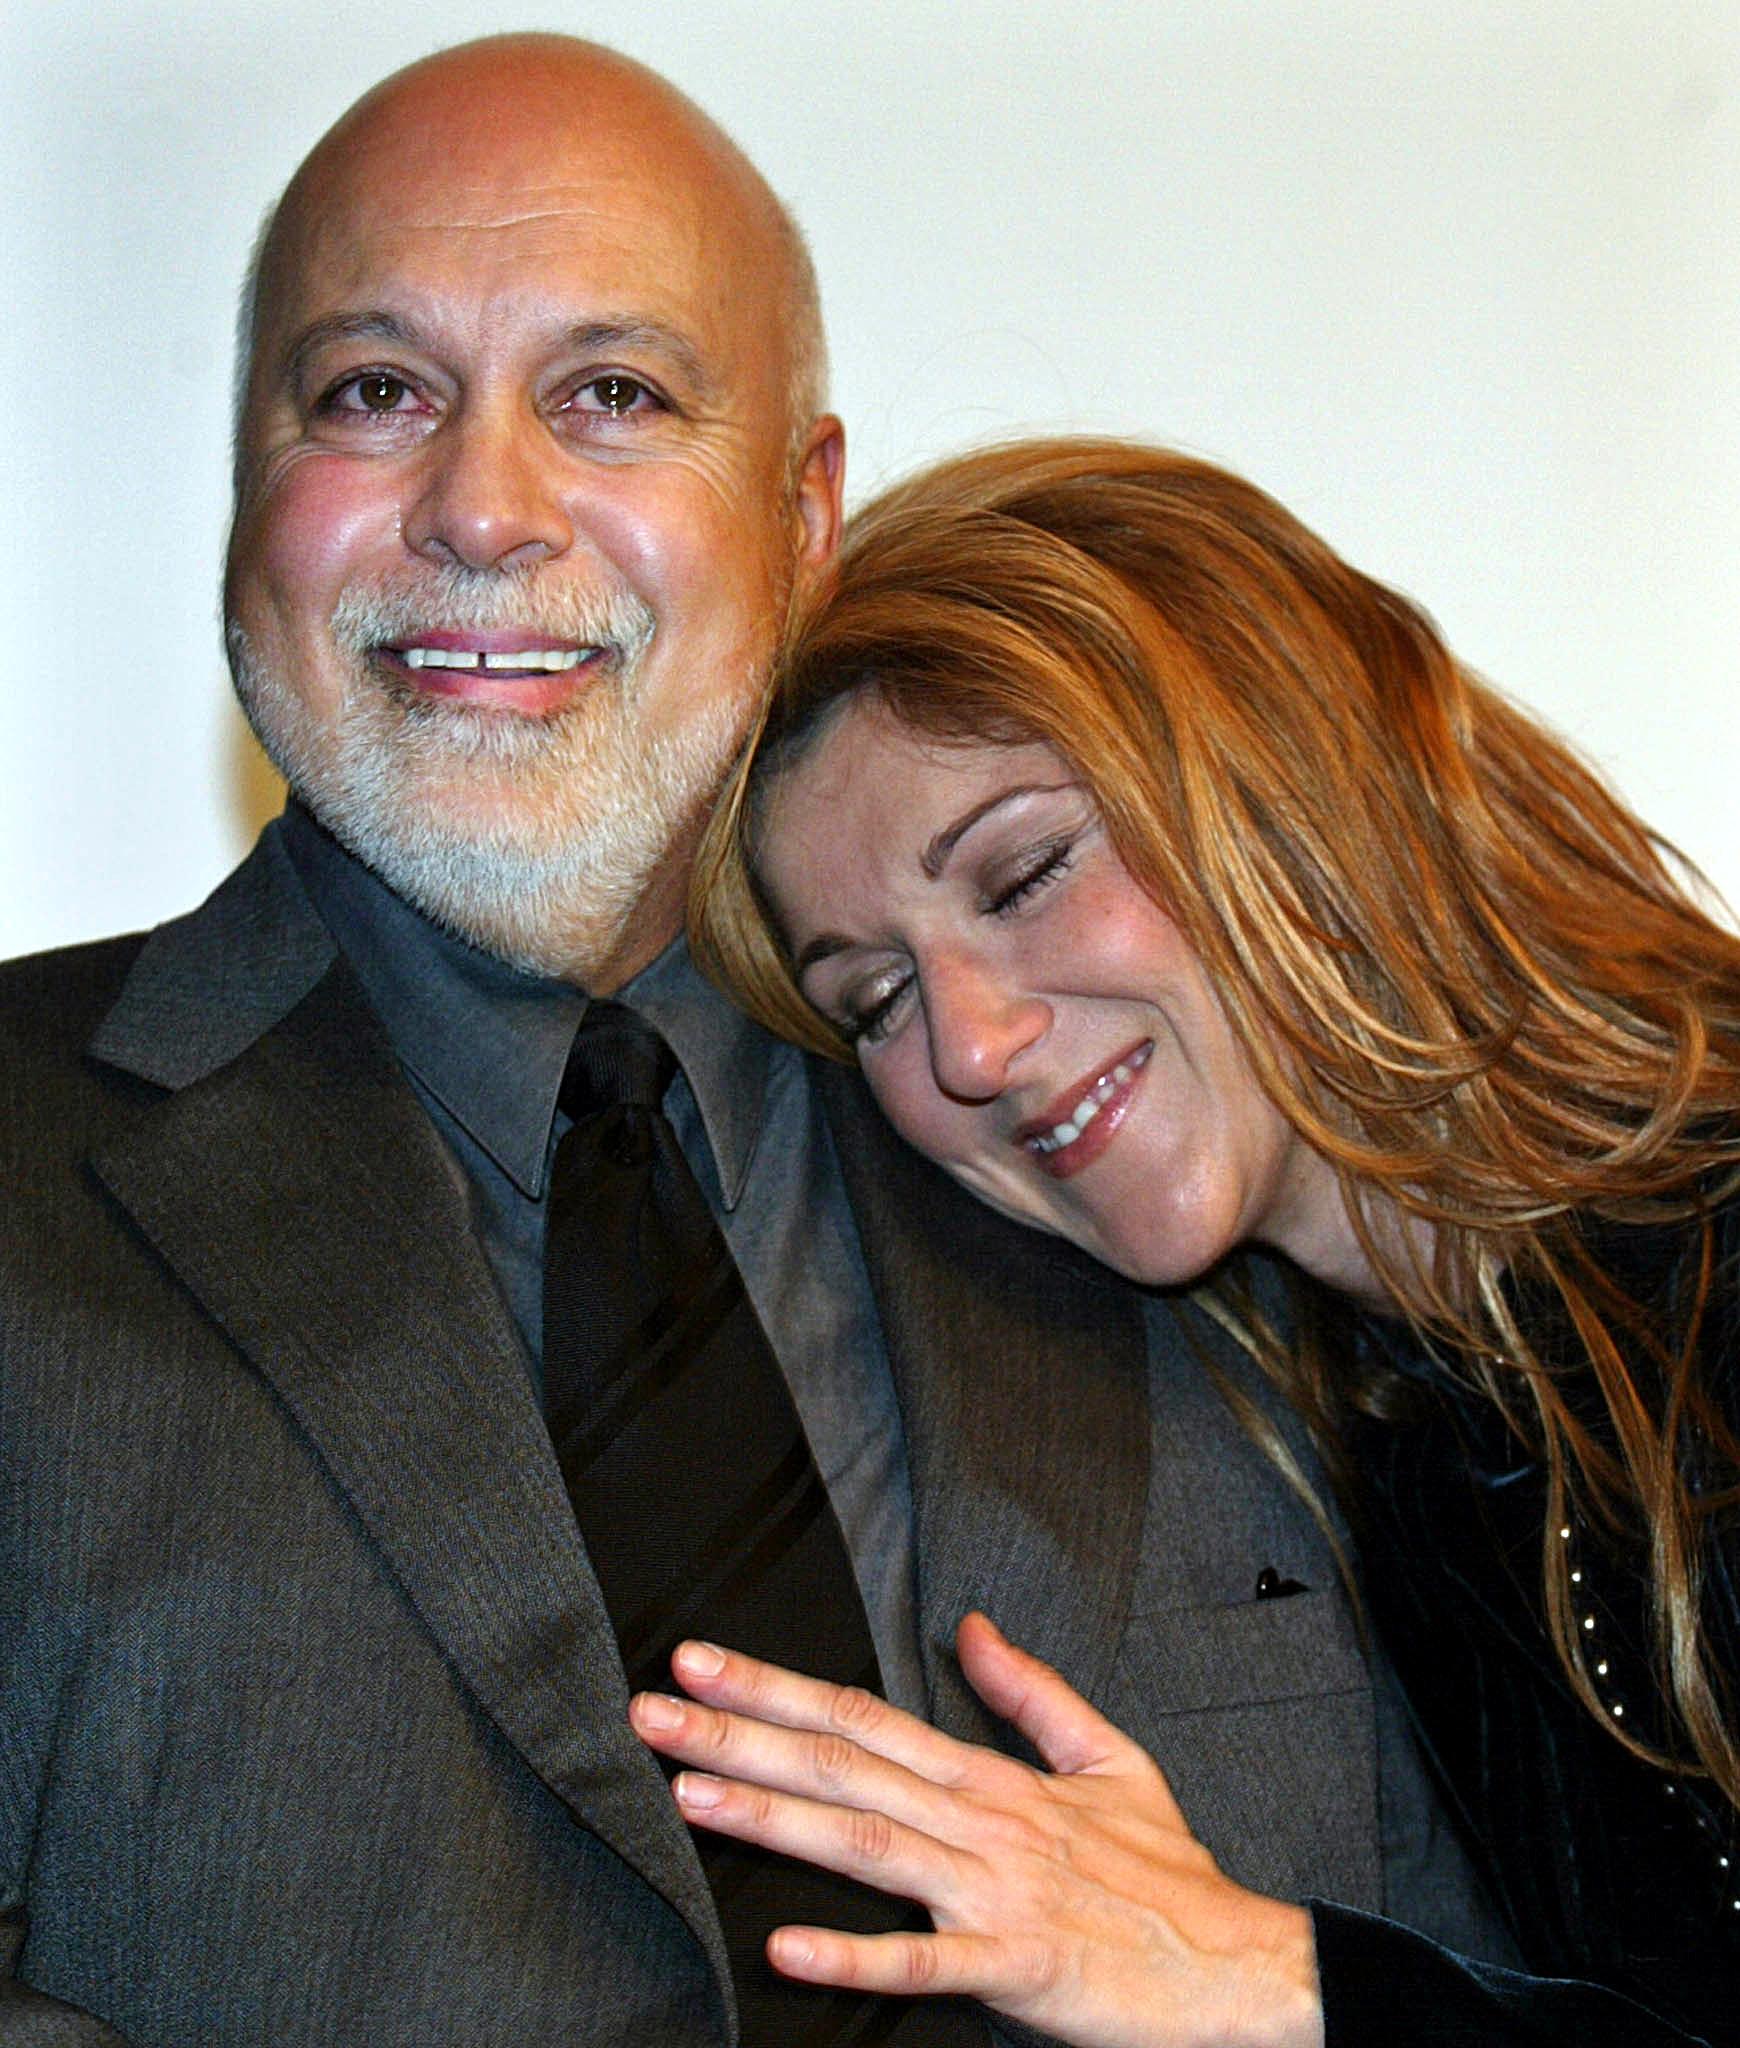 Celine Dion and her husband René Angélil in Montreal, Canada in 2002. | Source: Getty Images 